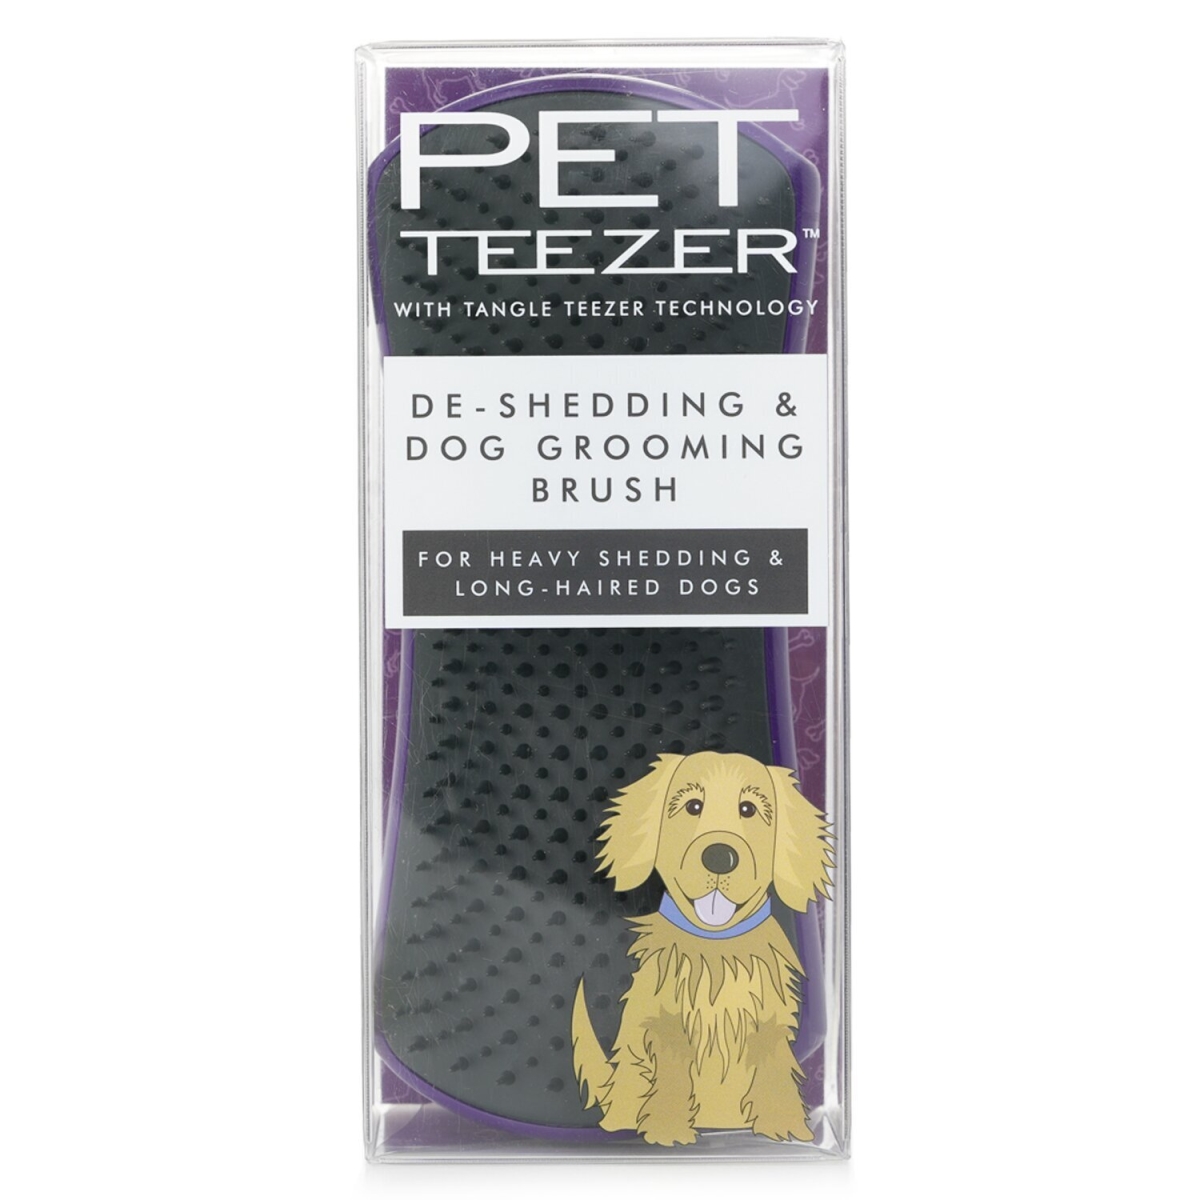 Picture of Tangle Teezer 312005 Pet Teezer De-Shedding & Dog Grooming Brush for Heavy Shedding & Long Haired Dogs - Purple & Gray